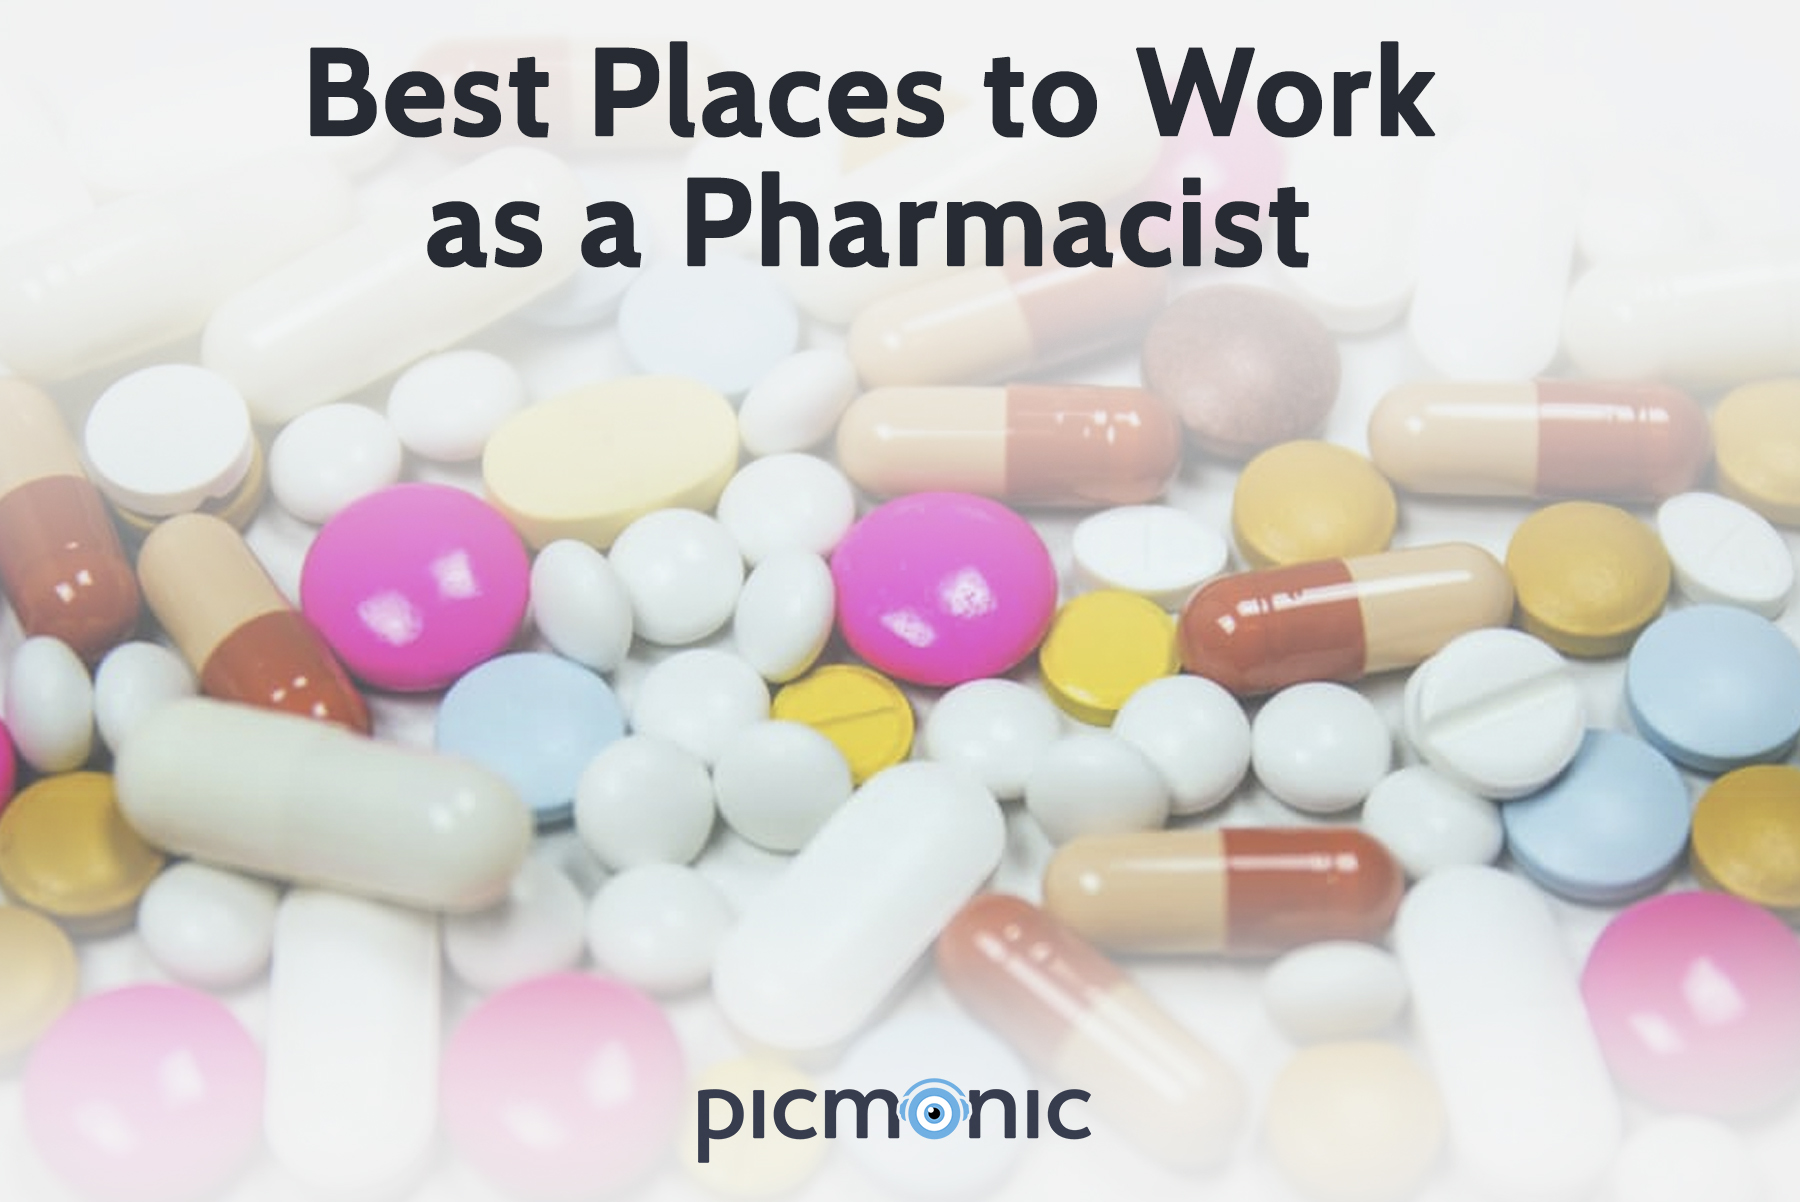 Best Places to Work as a Pharmacist - Picmonic